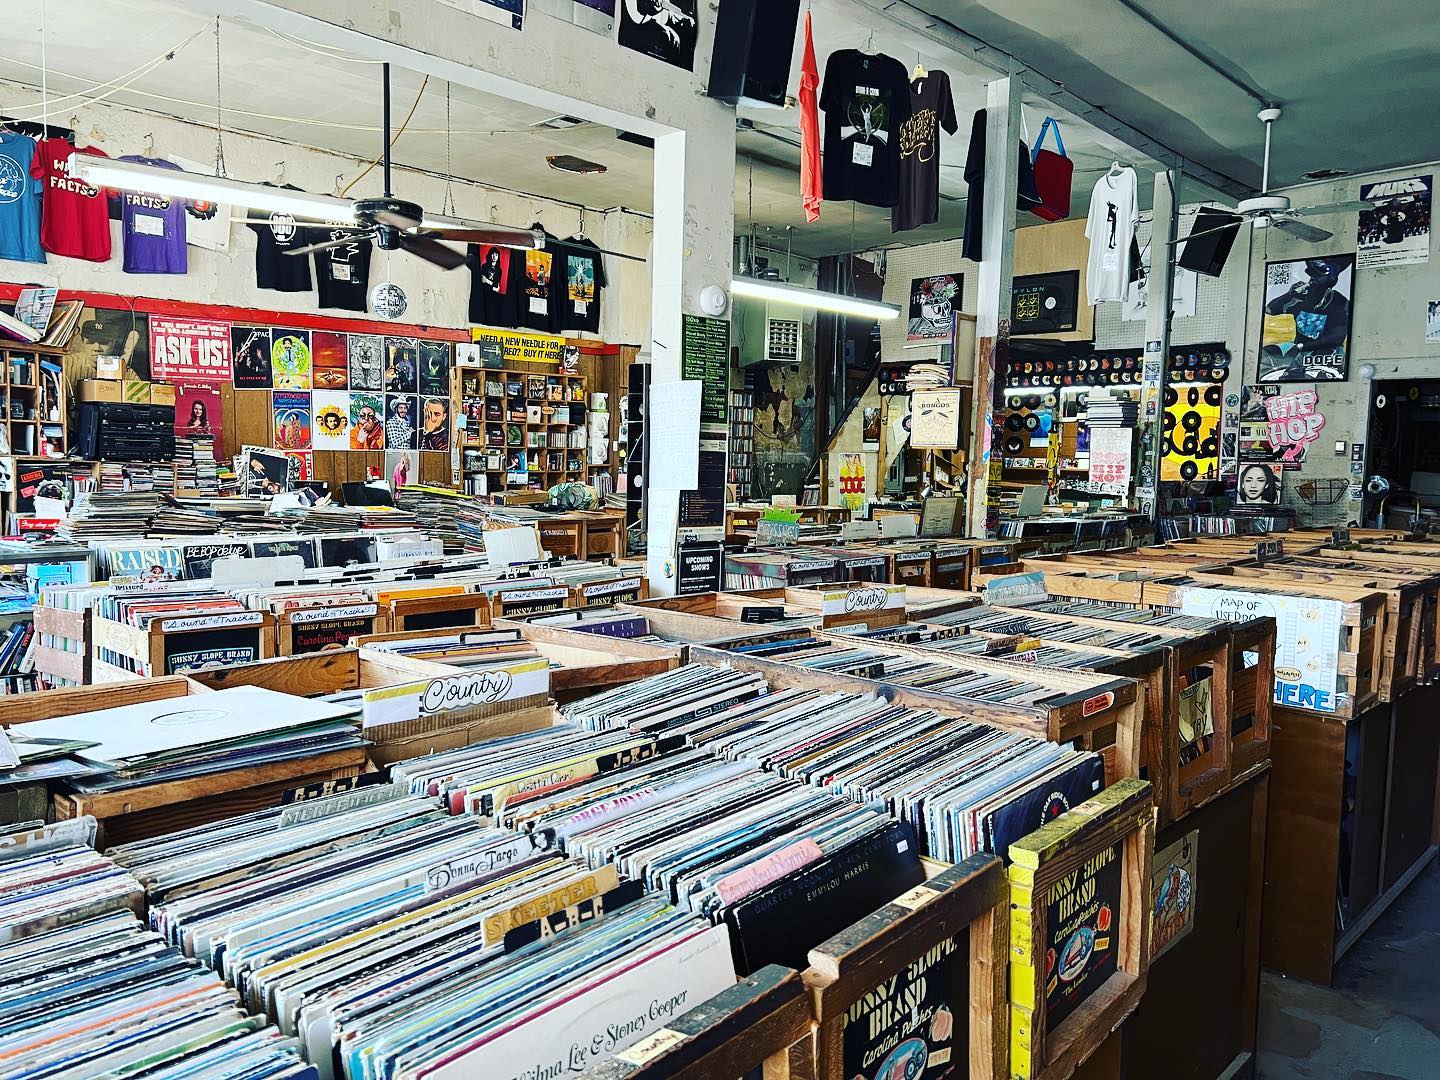 My happy place! @waxnfacts #records #harry! #morerecords